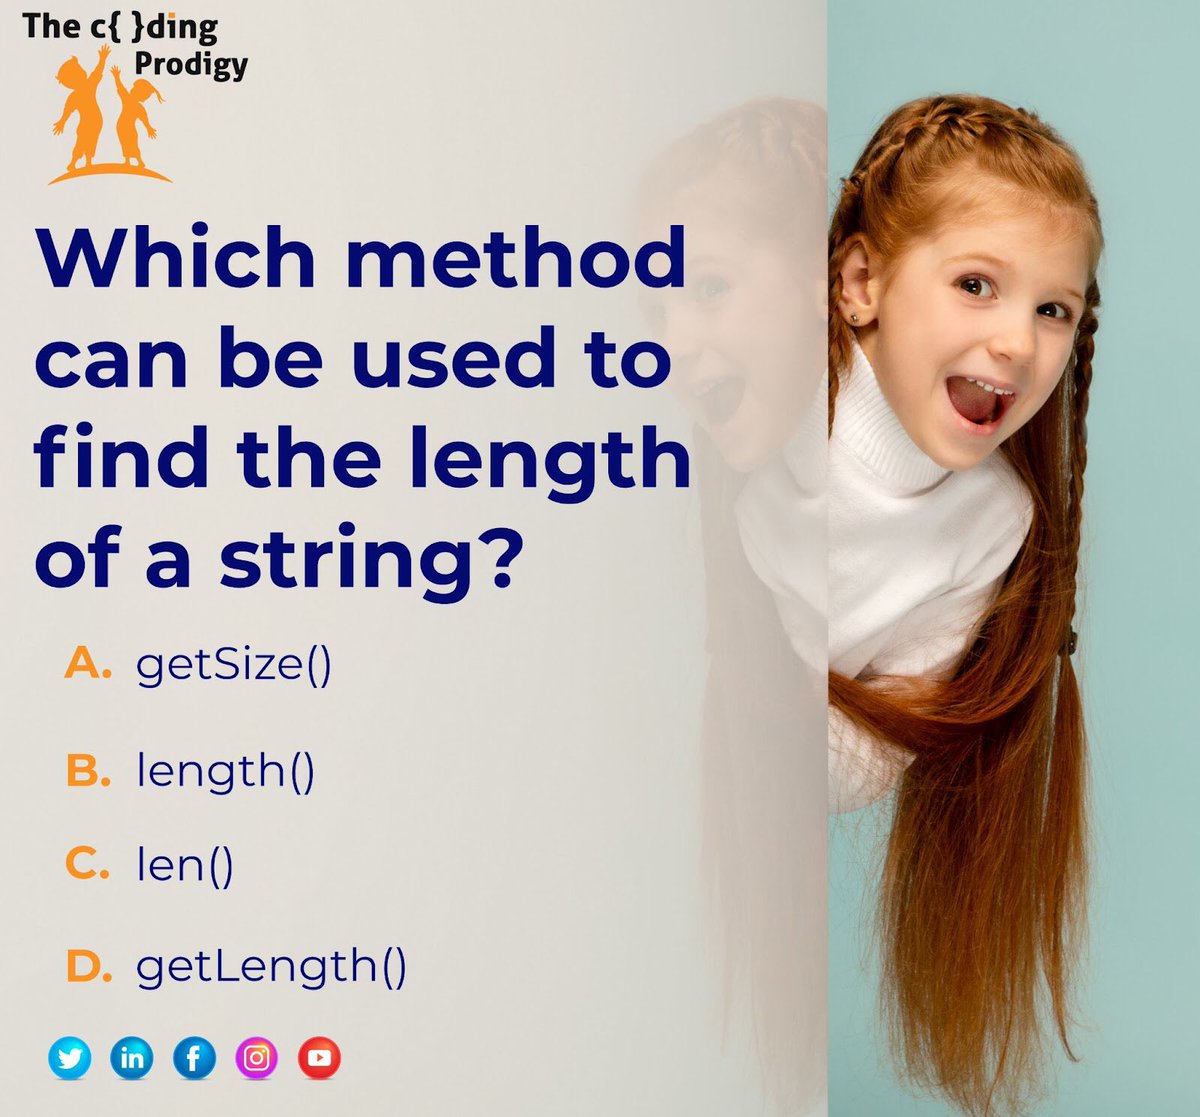 Write your answers in the comments! 😊💻🧠

Book a Free Coding Class: primedtalent.com/tcpregister

#thecodingprodigy #programmingquiz #programming #programmer #python #pythoncode #codingchallenge #programmerlife #learntocode #codingquiz #coding #developer